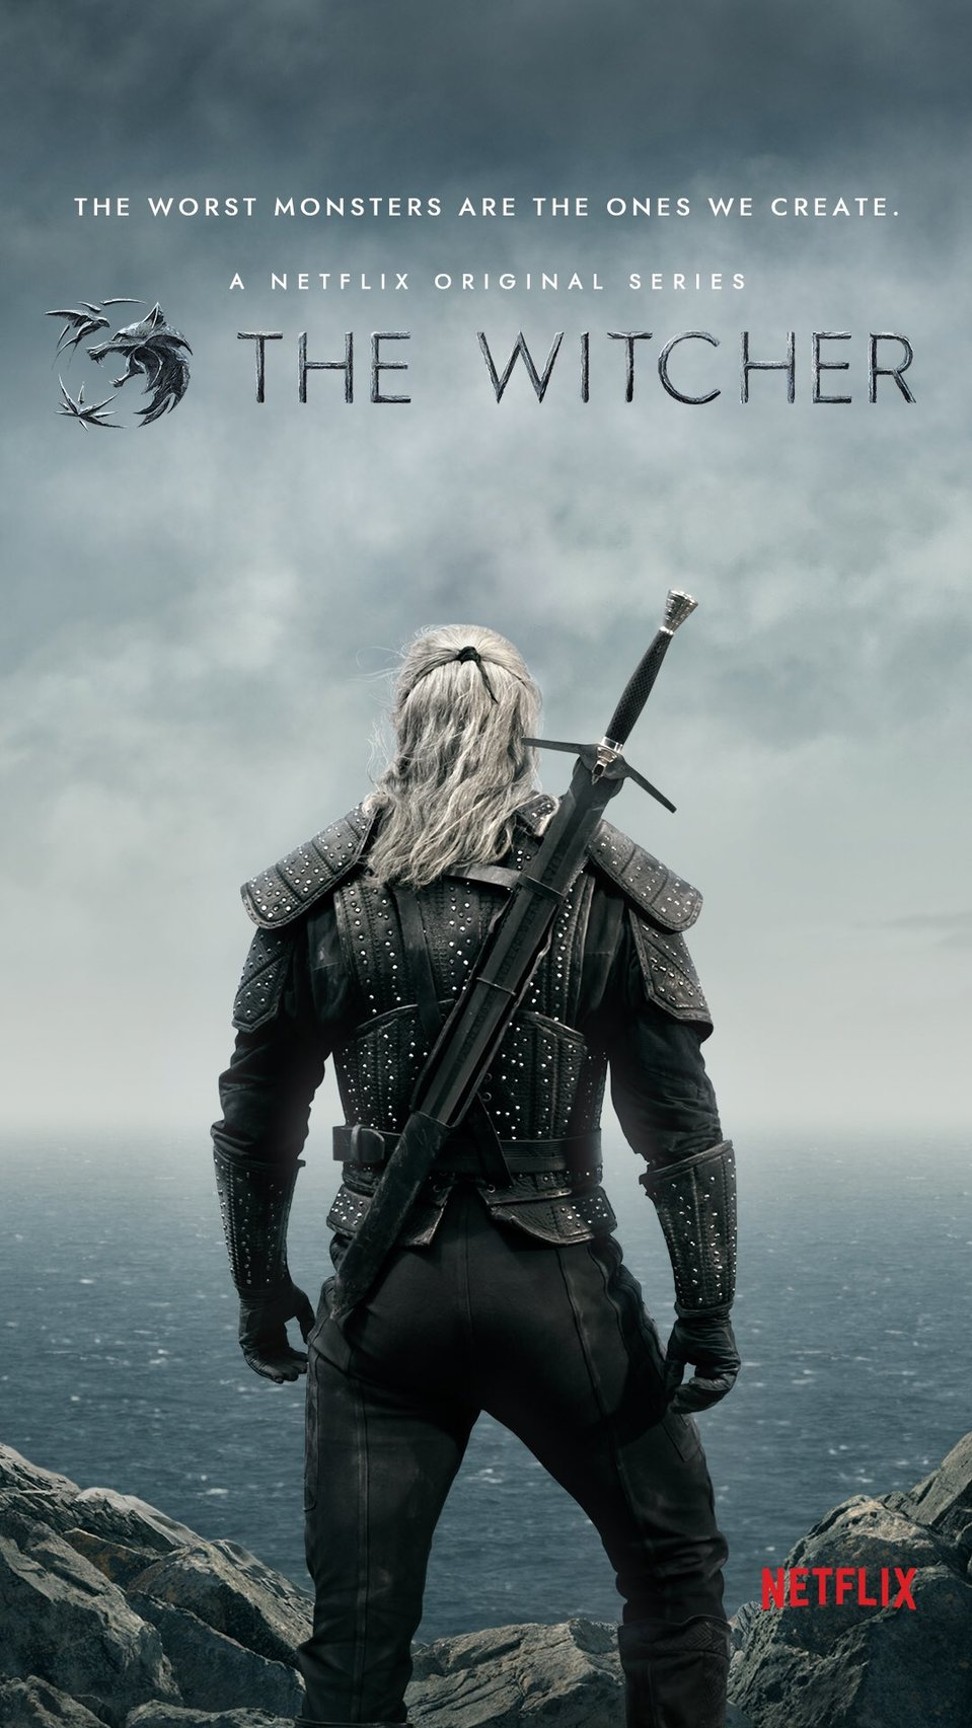 Is 'The Witcher' the next 'Game of Thrones'? - Deseret News